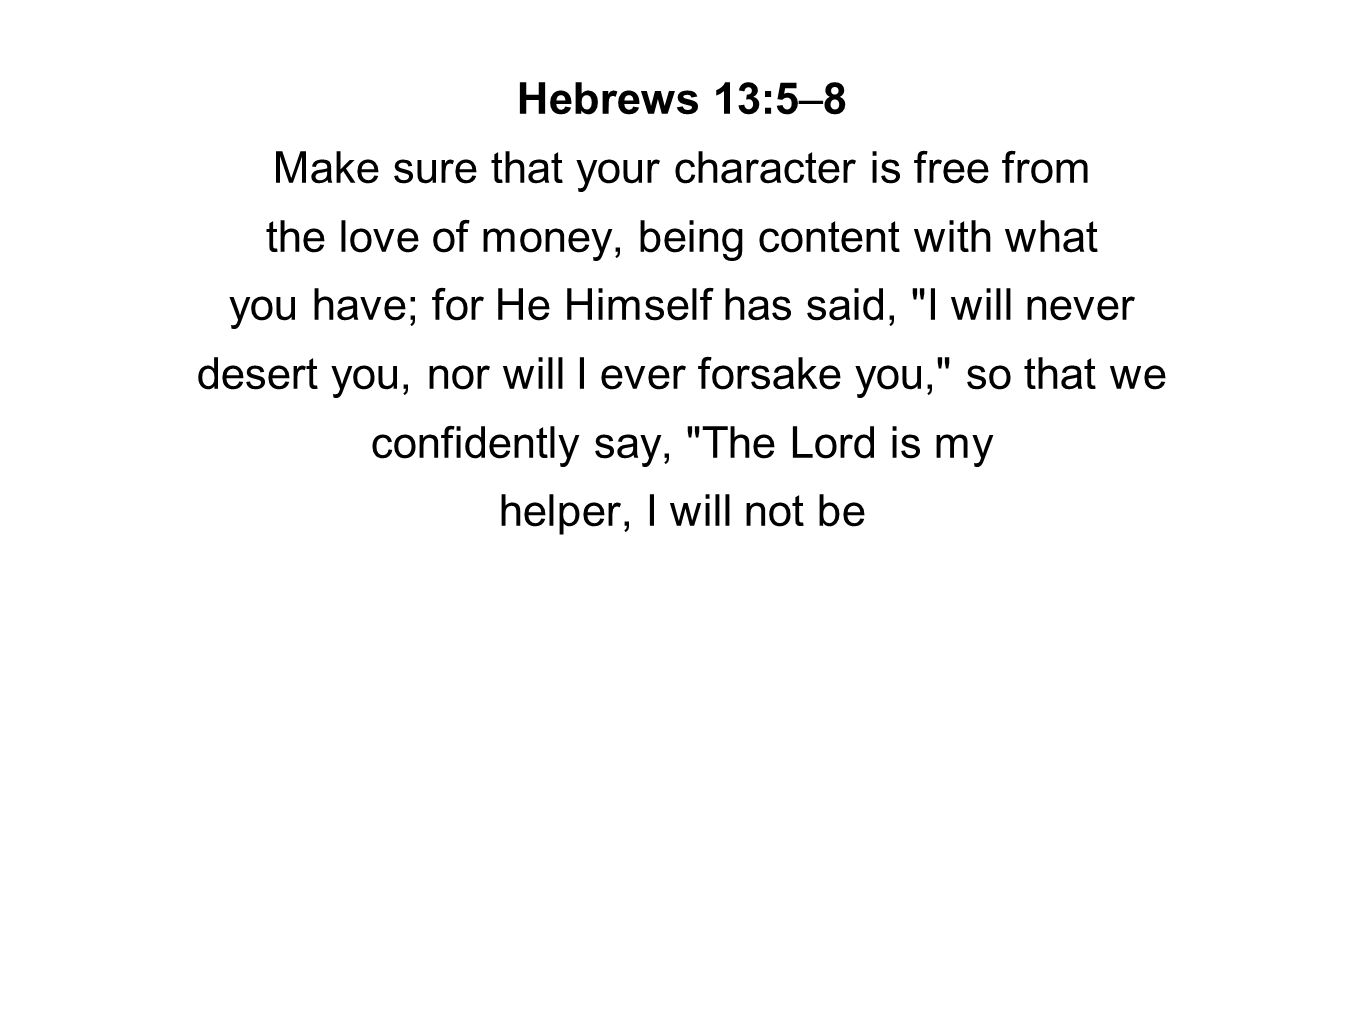 Hebrews 13:5–8 Make sure that your character is free from the love of money, being content with what you have; for He Himself has said, I will never desert you, nor will I ever forsake you, so that we confidently say, The Lord is my helper, I will not be